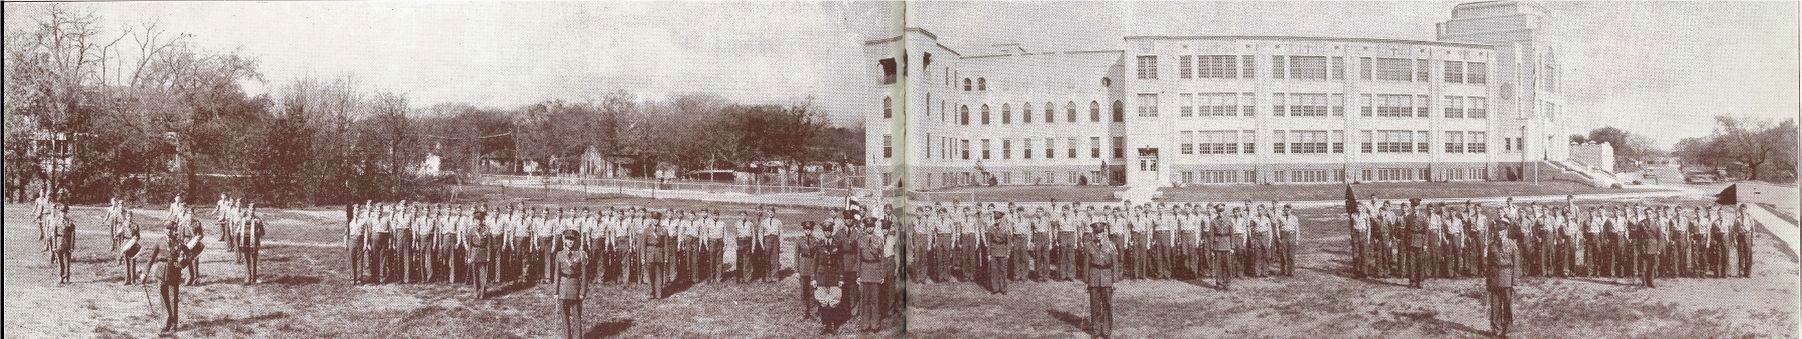 Central Catholic High School Corps of Cadets image. Click for full size.